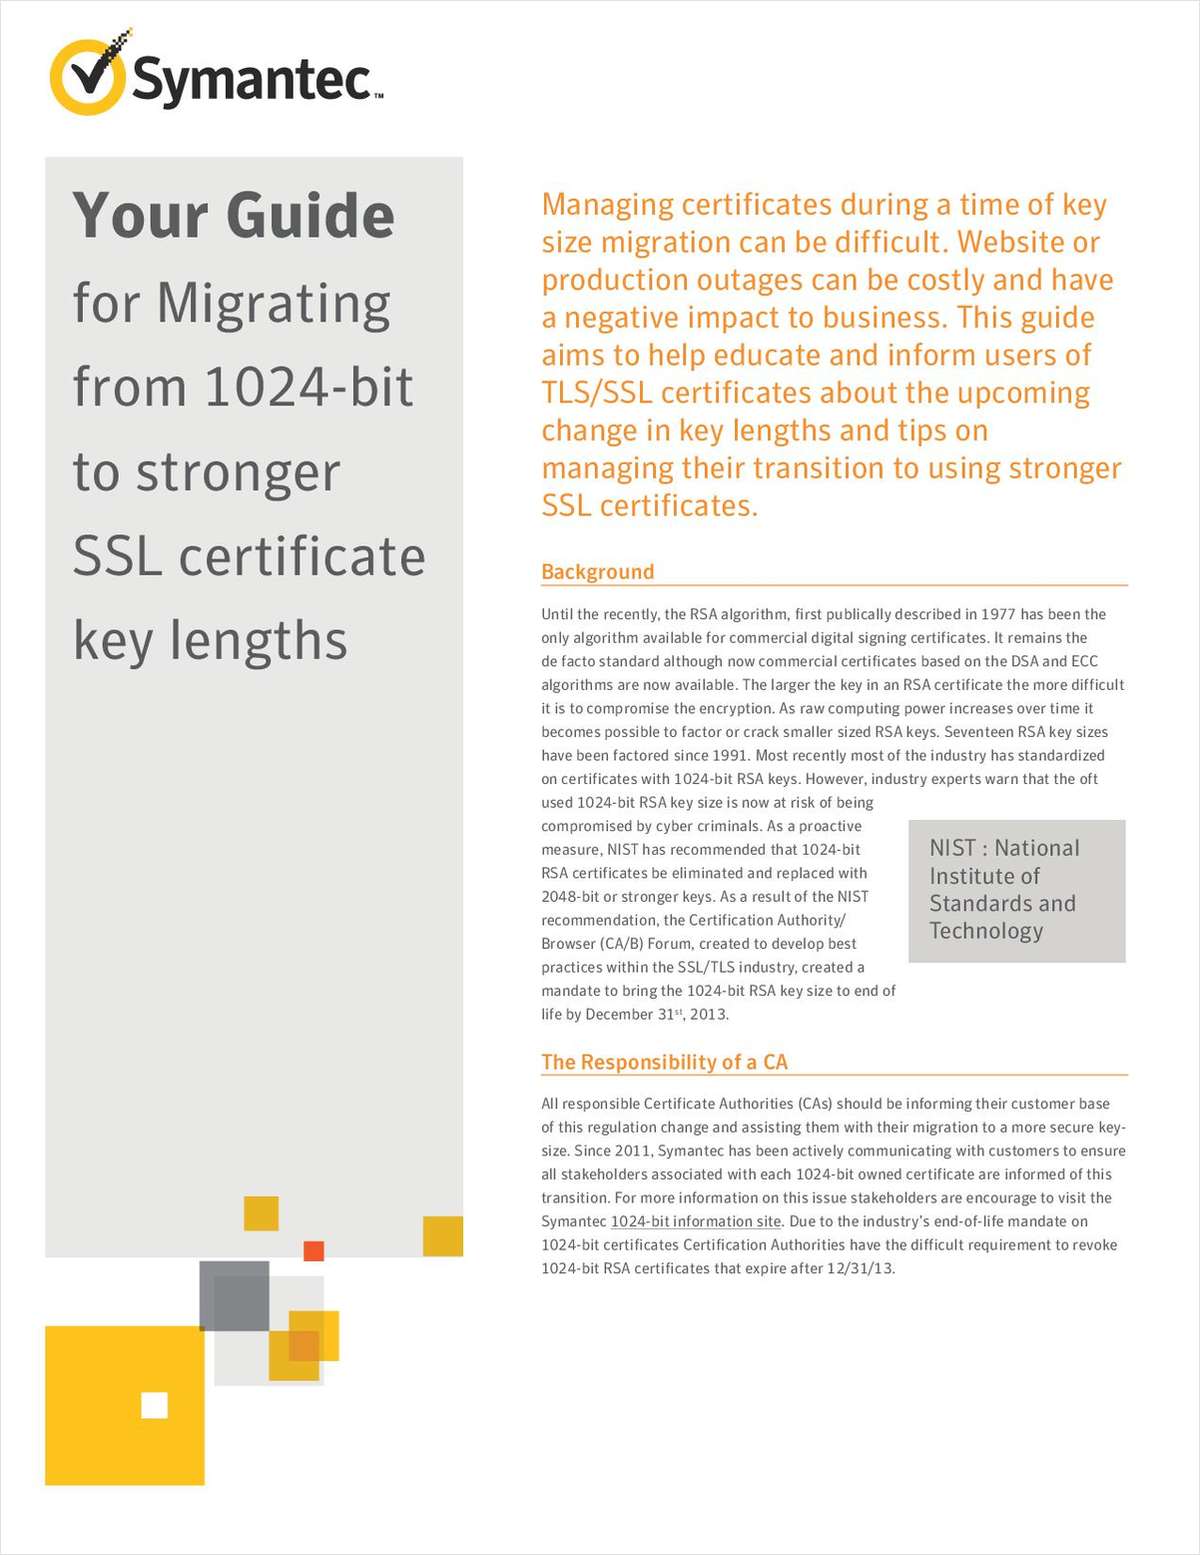 Your Guide for Migrating from 1024-Bit to Stronger SSL Certificate Key Lengths